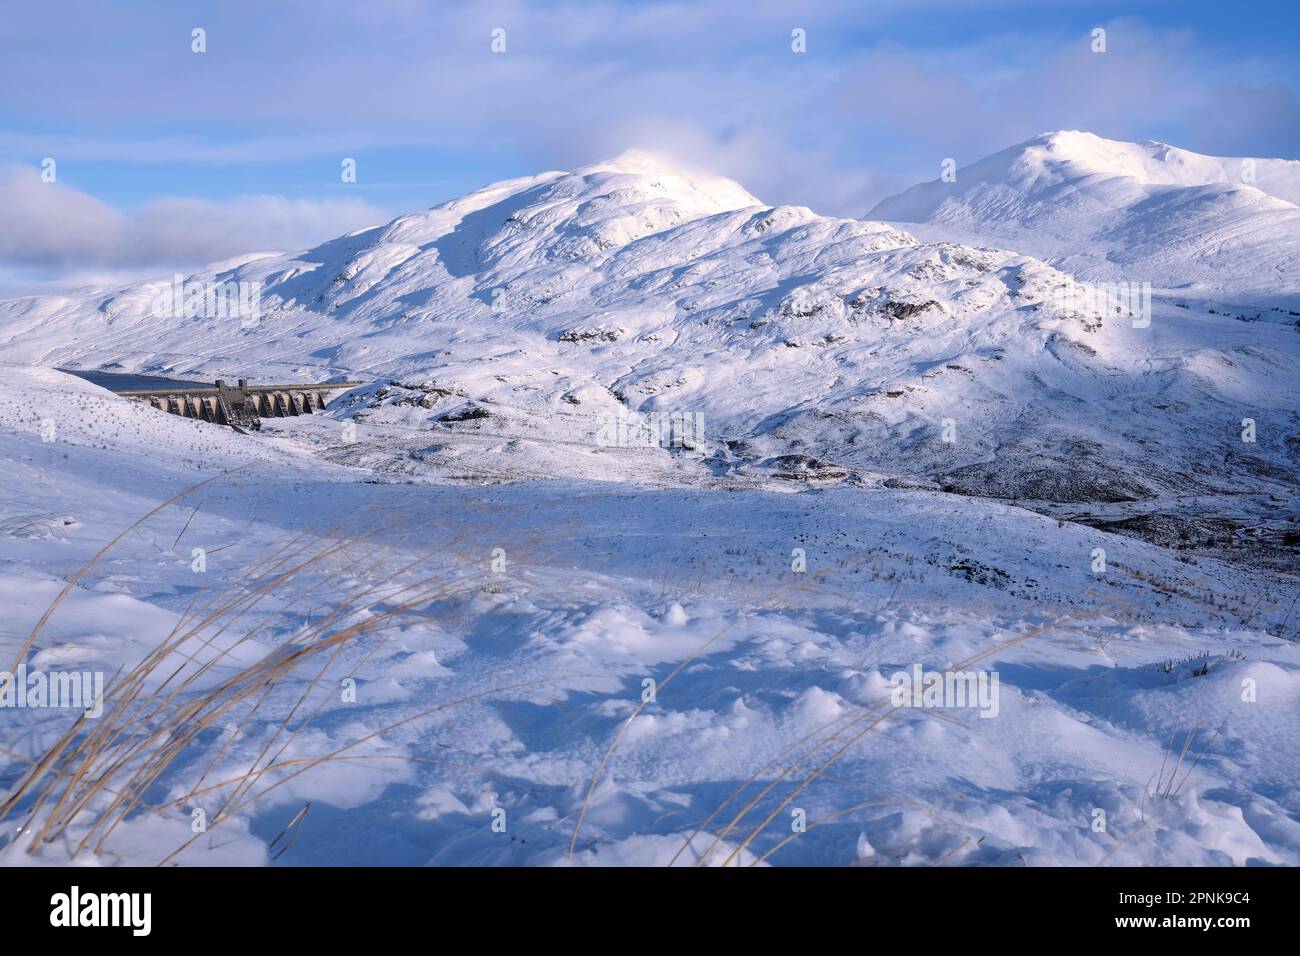 A January snowfall covers the slopes of Ben Lawers and Beinn Ghlas with a view of the Lawers Dam, Killin Scotland Stock Photo